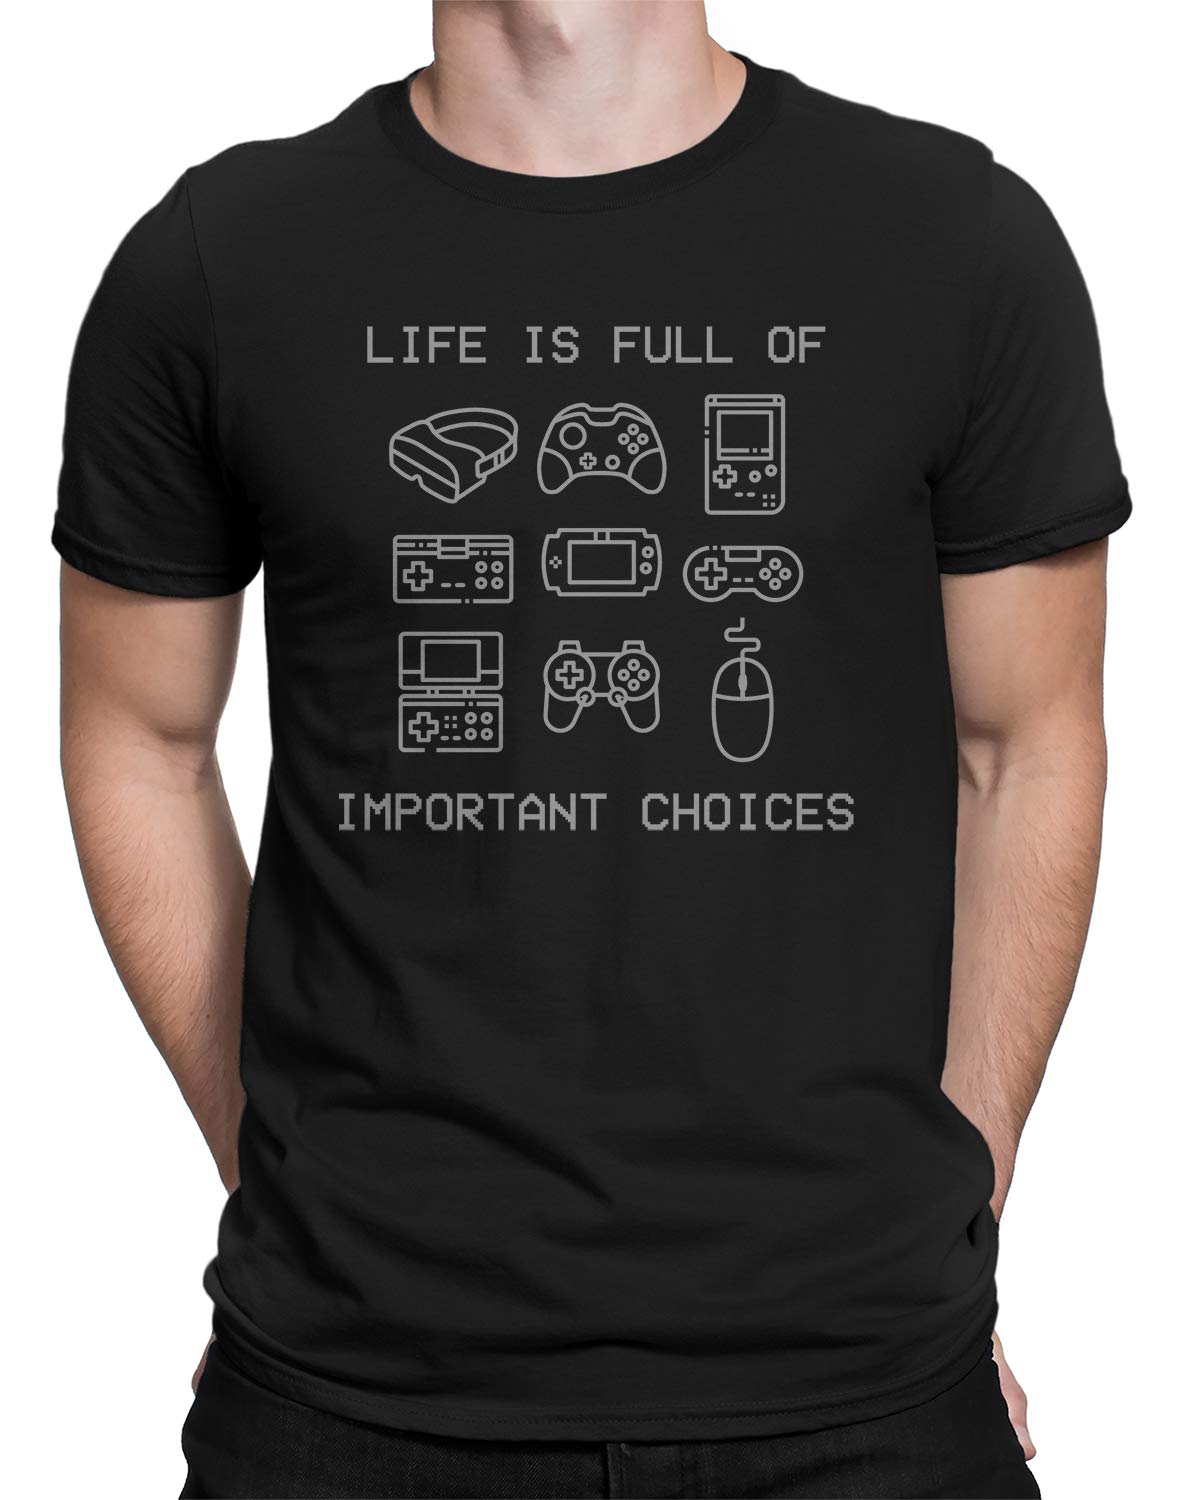 Book Cover Life is Full of Important Choices Video Games Gamer Men's T-Shirt Small Black